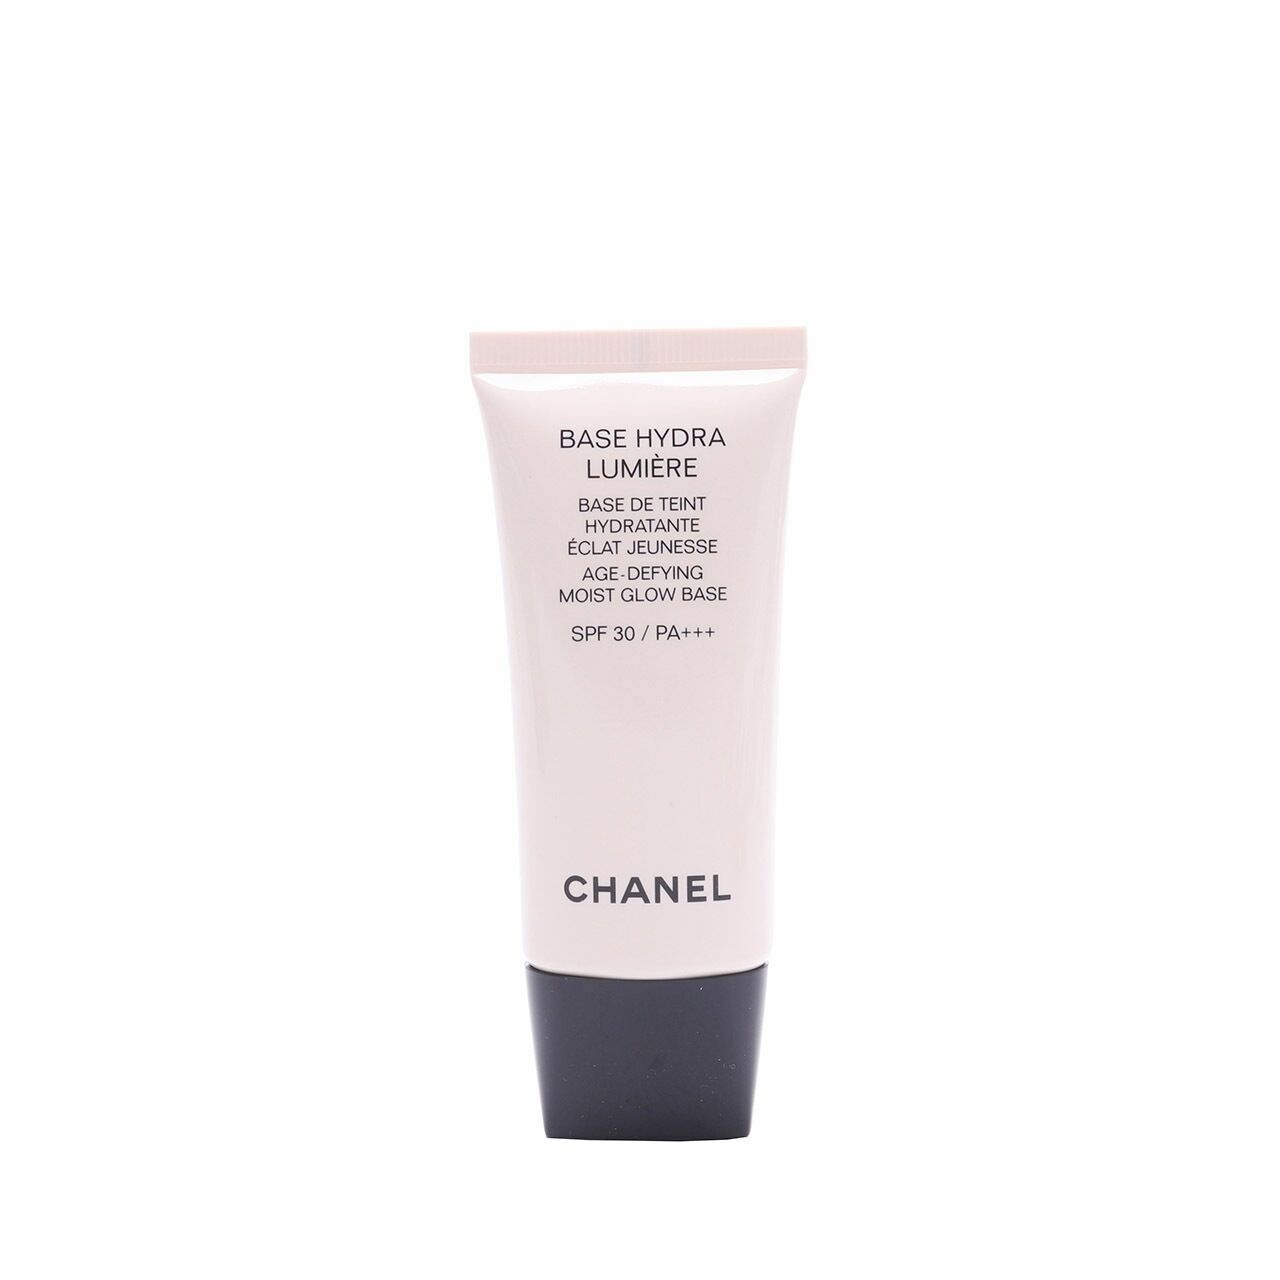 Chanel Base Hydra Lumiere Faces